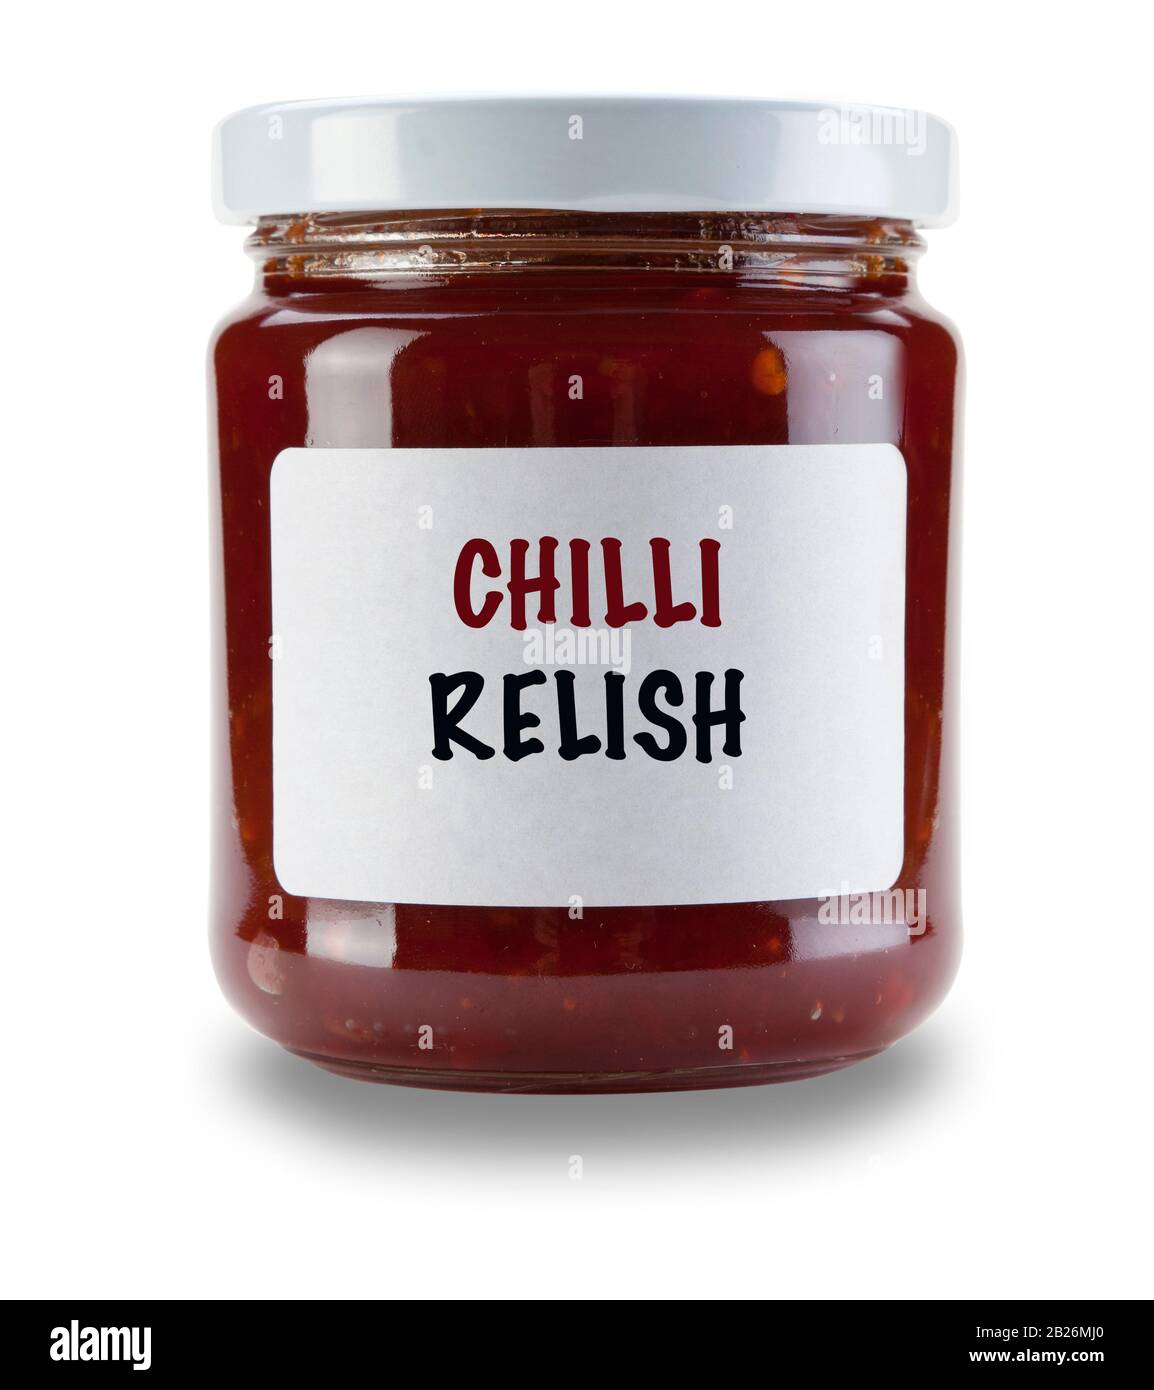 Single Jar Of Chilli Relish With White Label Saying Chilli Relish Isolated On A White Background With A Drop Shadow Stock Photo Alamy